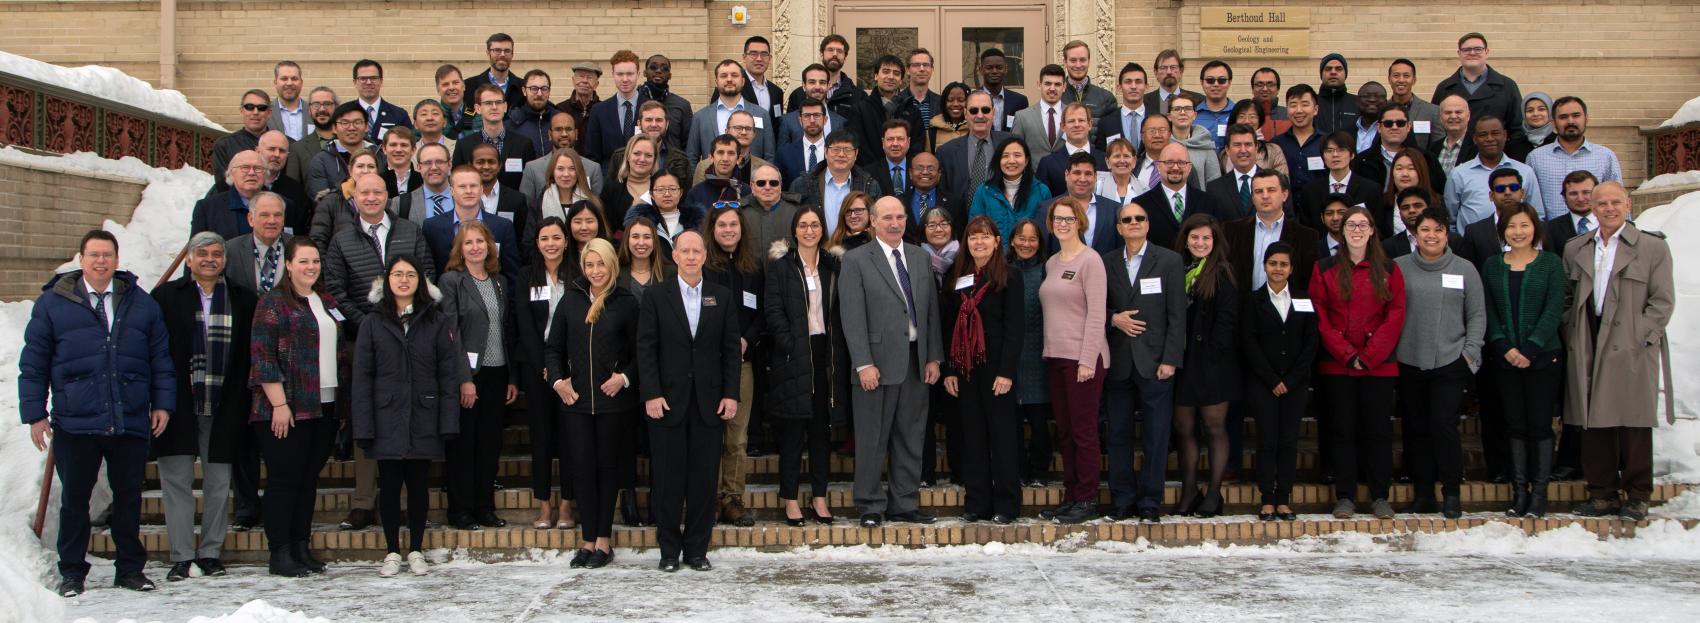 Colorado School of Mines hosts the CMI Meeting at Mines, focused on early career researchers. 